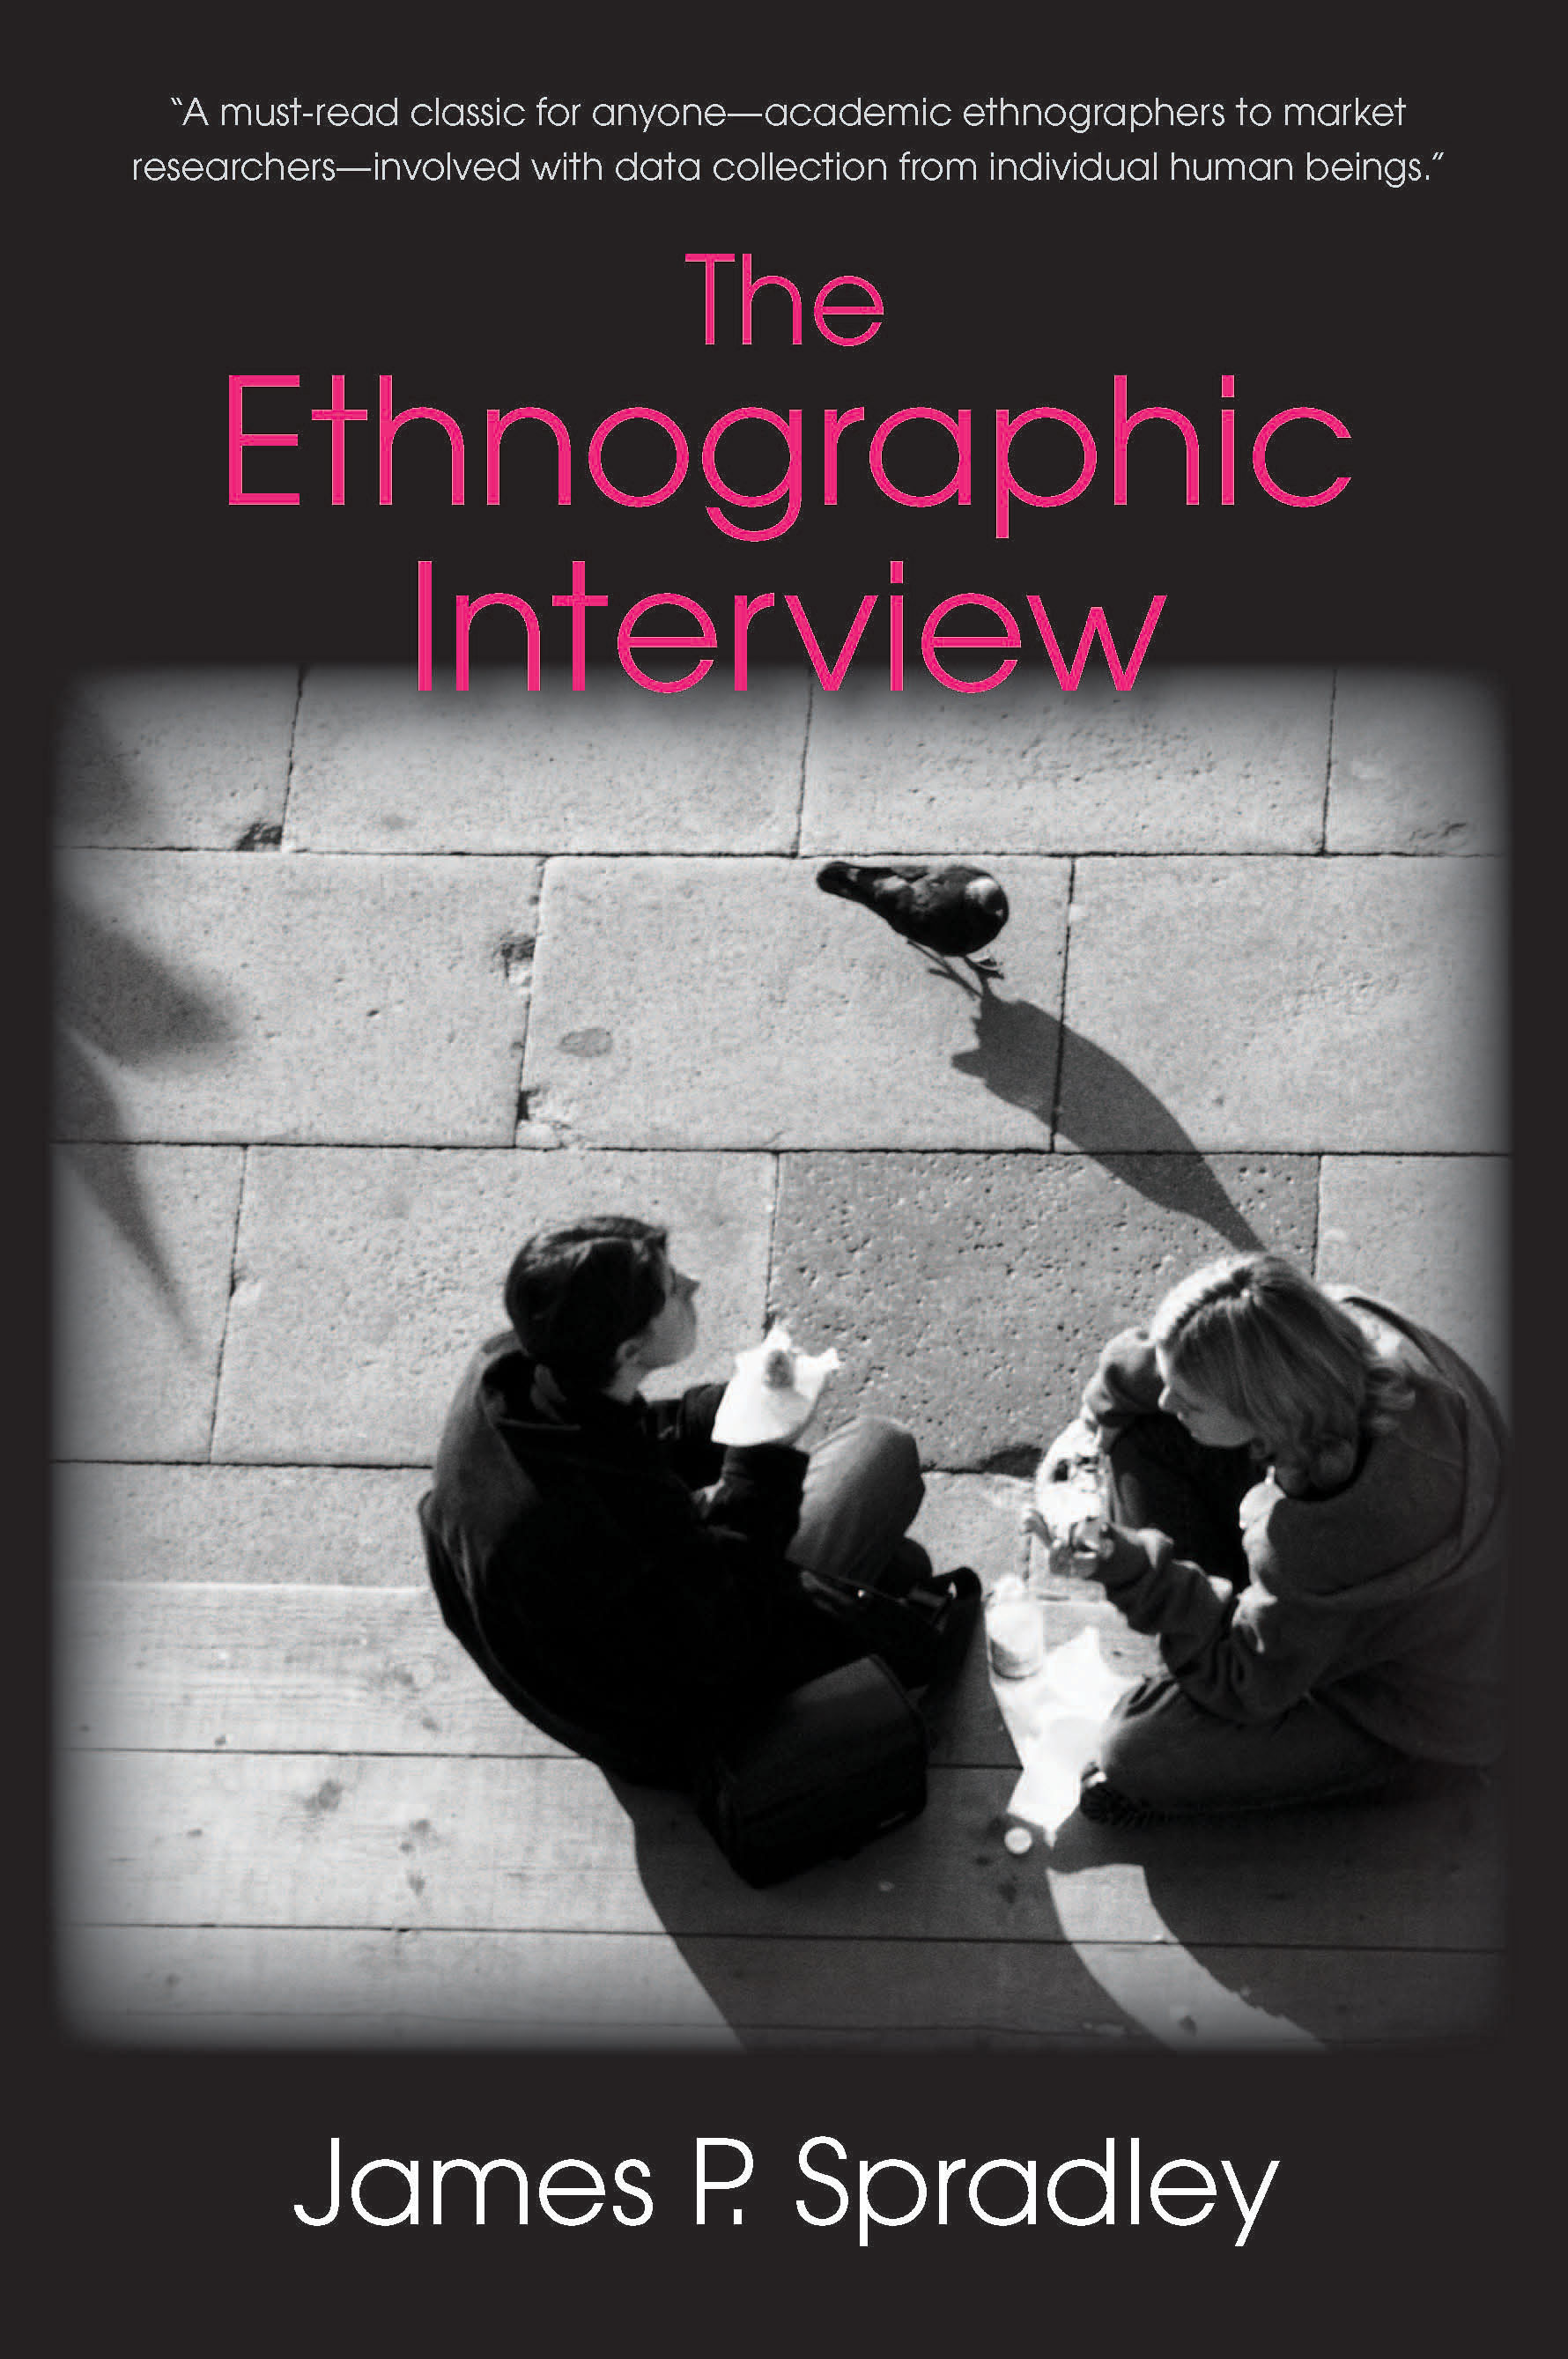 The Ethnographic Interview:  by James P. Spradley